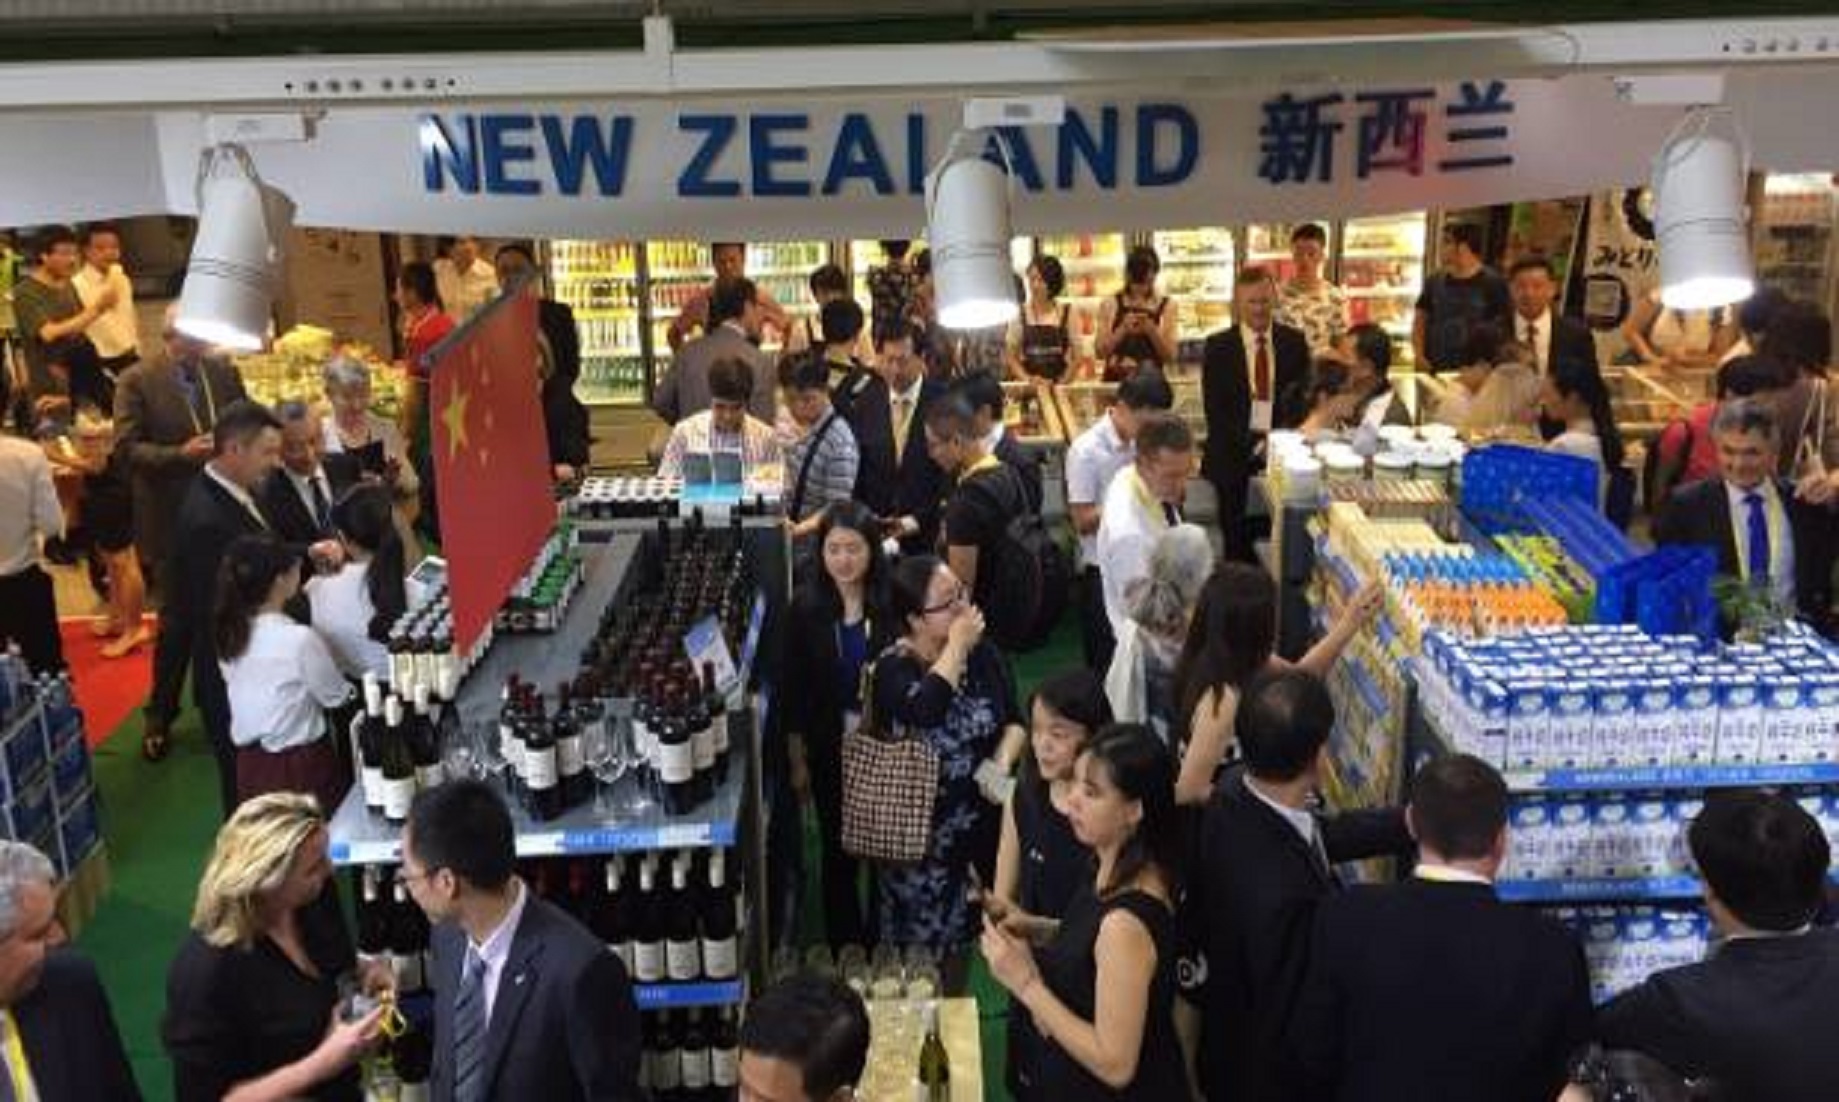 New Zealanders See Ties With Asia Of More Importance: Survey